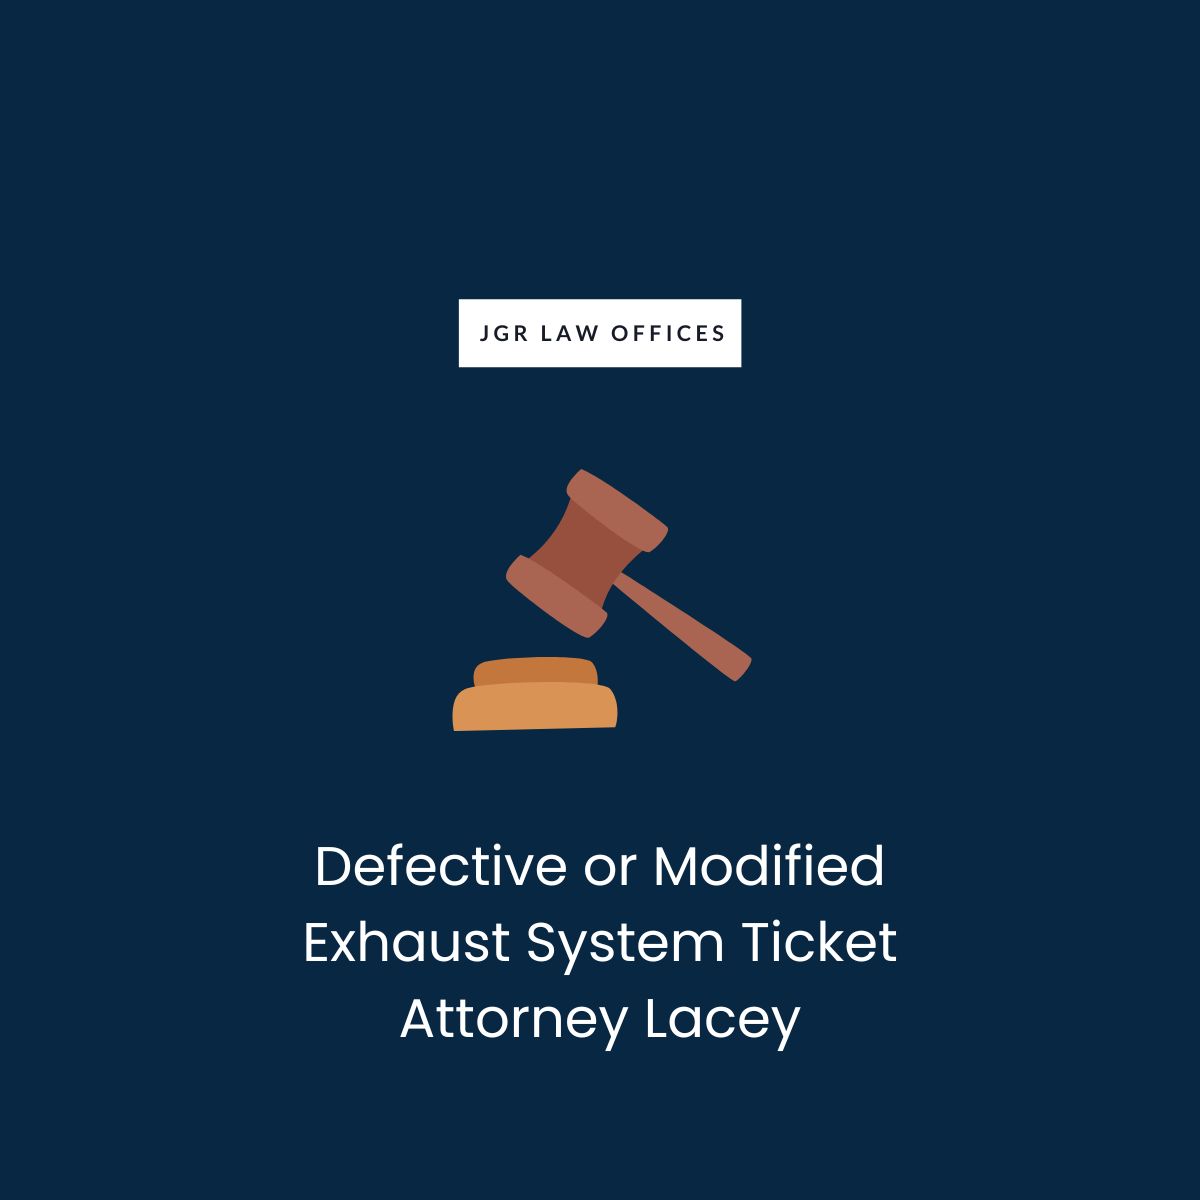 Defective or Modified Exhaust System Ticket Attorney Lacey